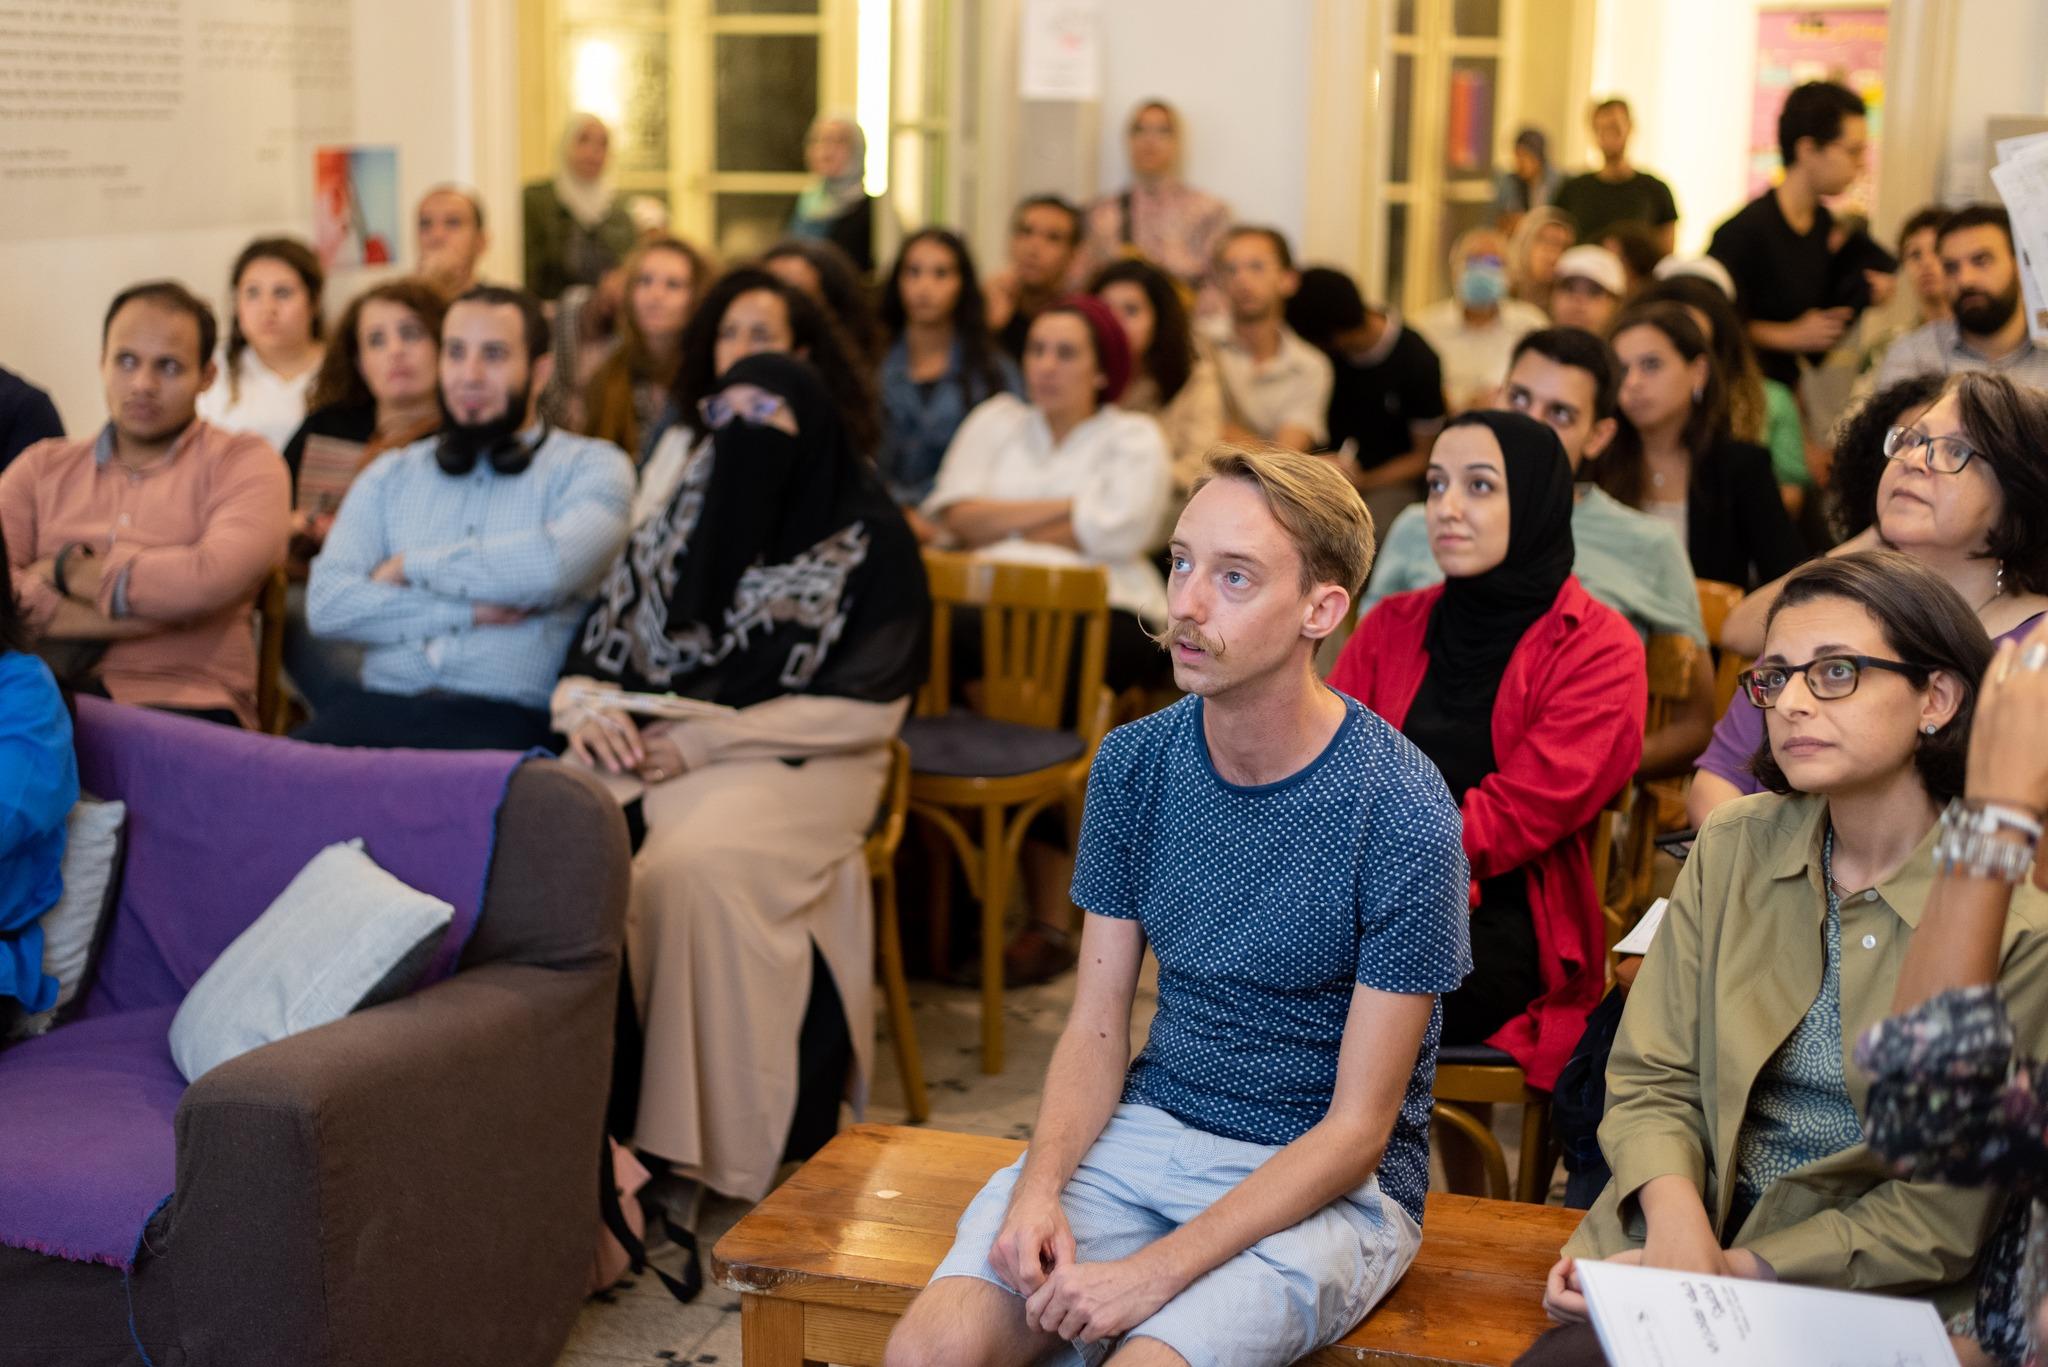 Figure 6: Audience at a public talk and panel discussion (Farida Youssef, bottom right)